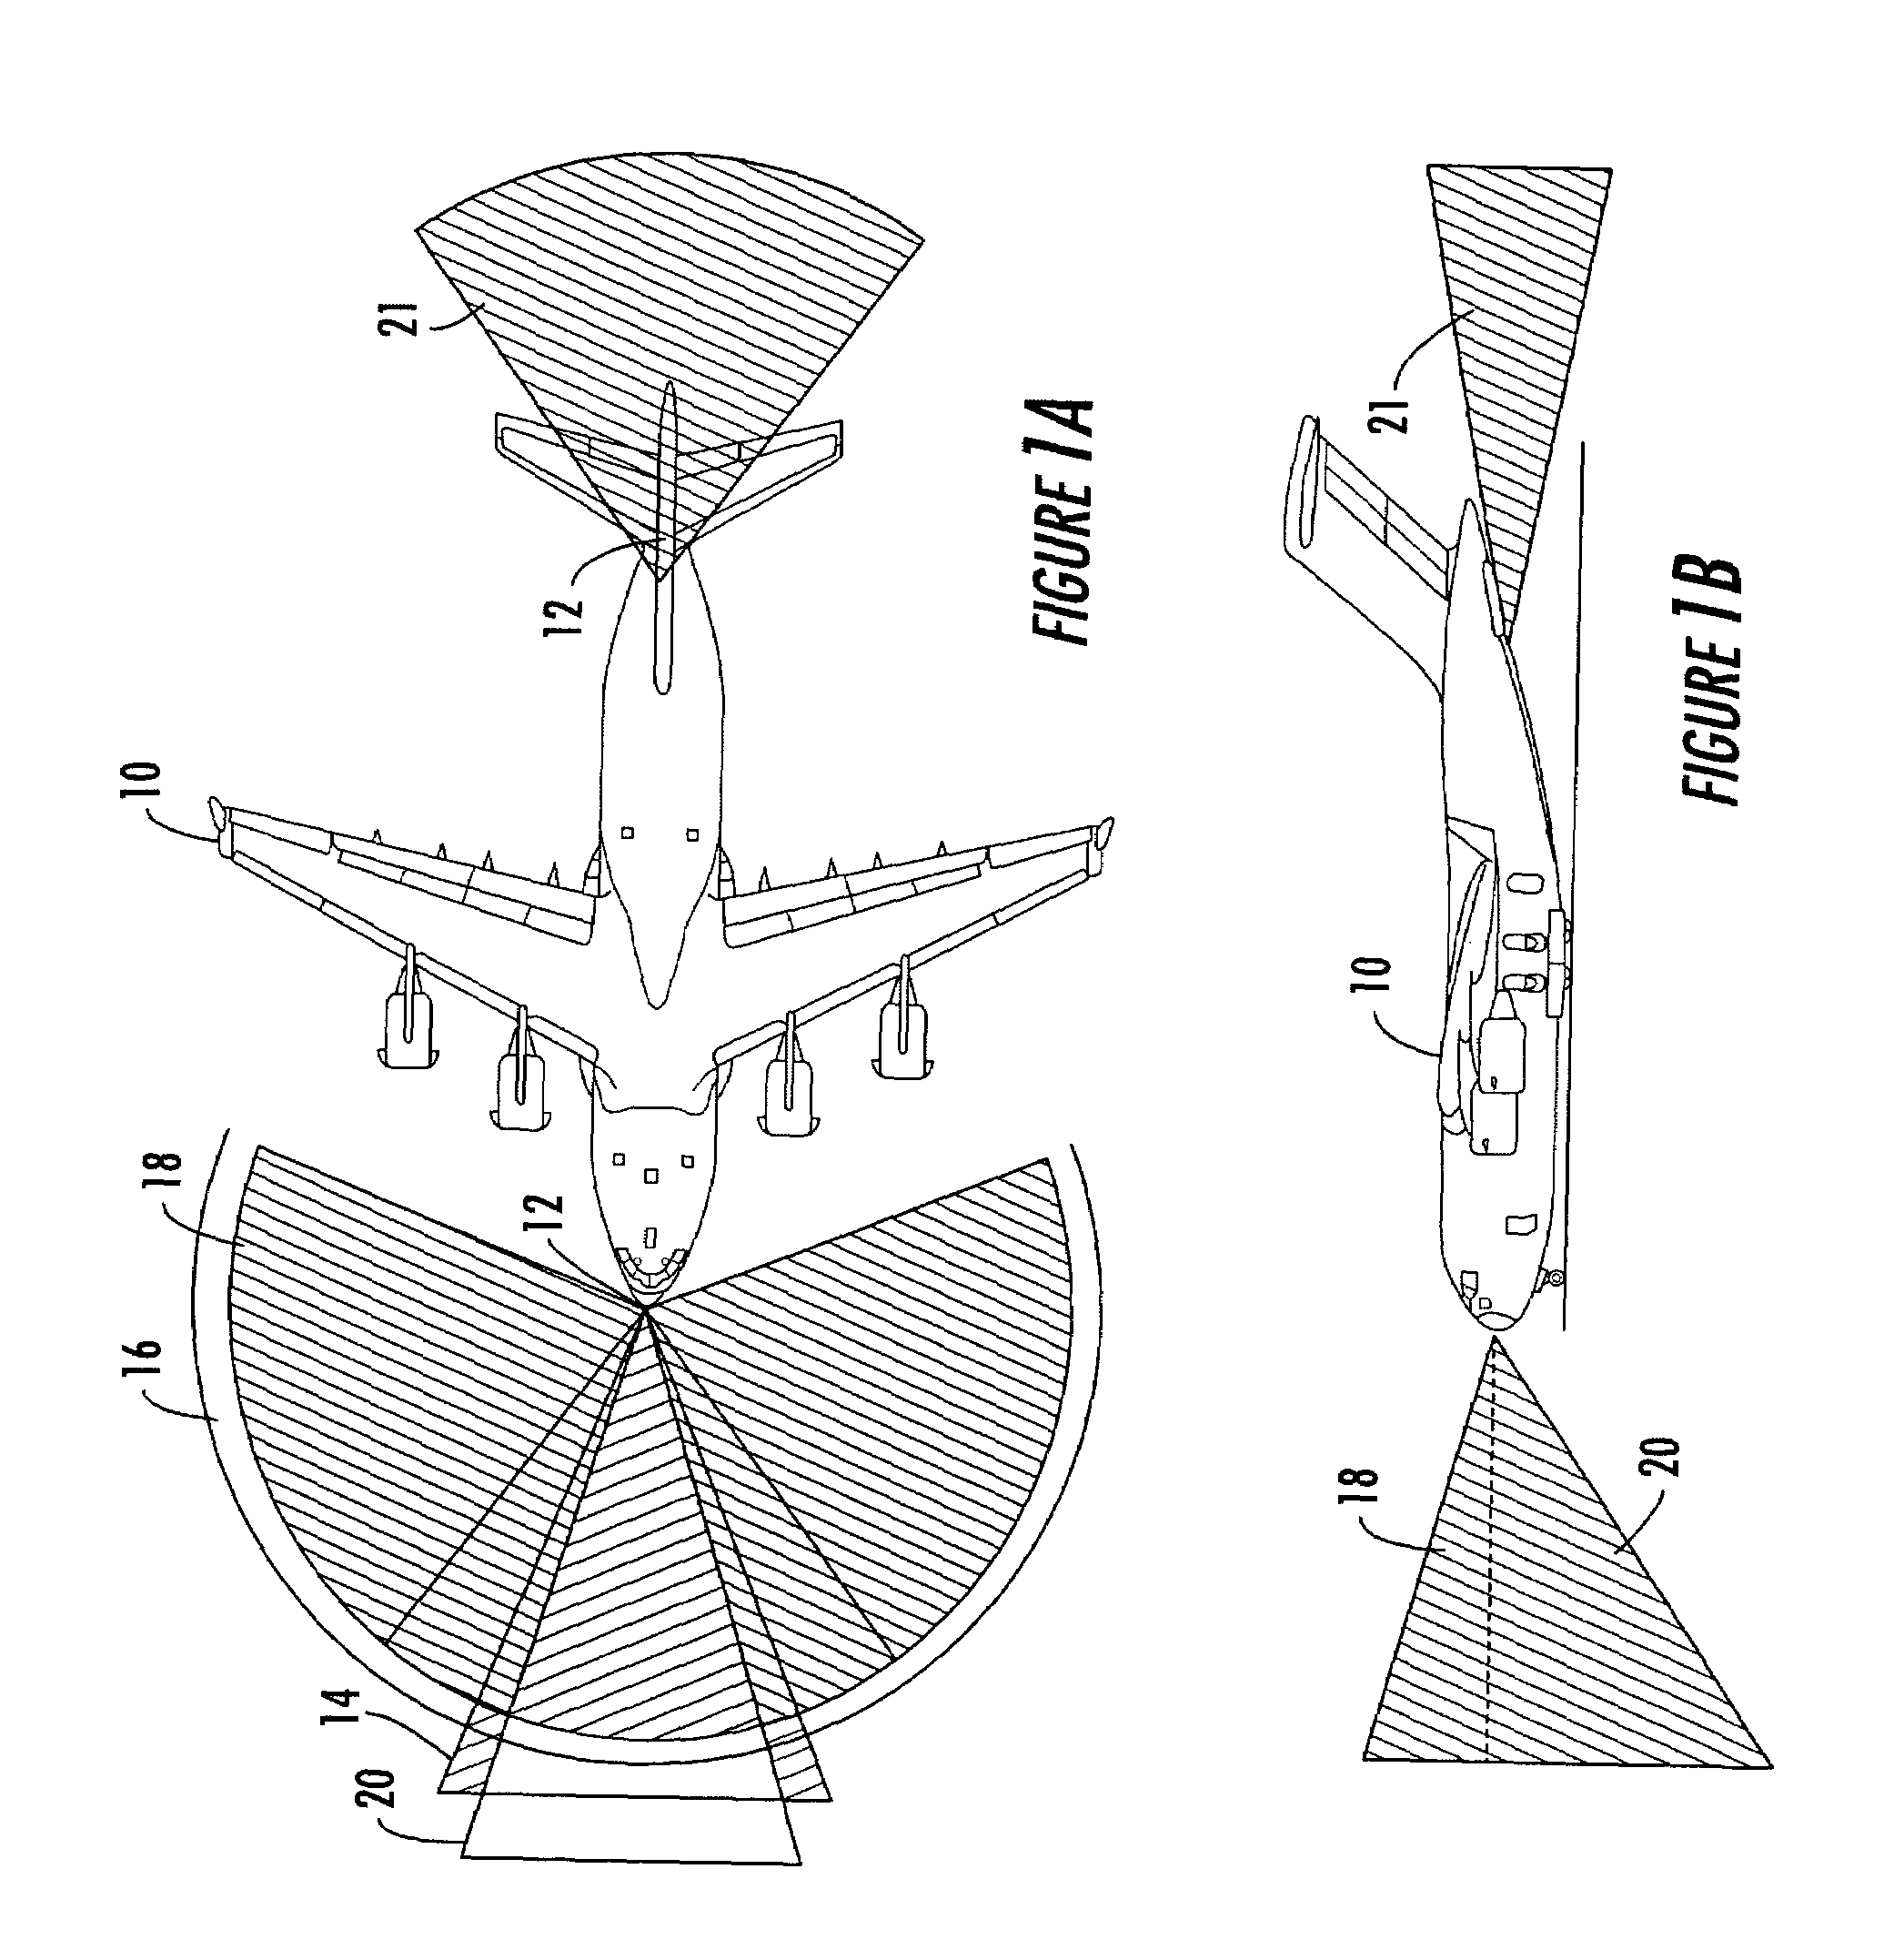 Systems and methods for providing enhanced vision imaging with decreased latency